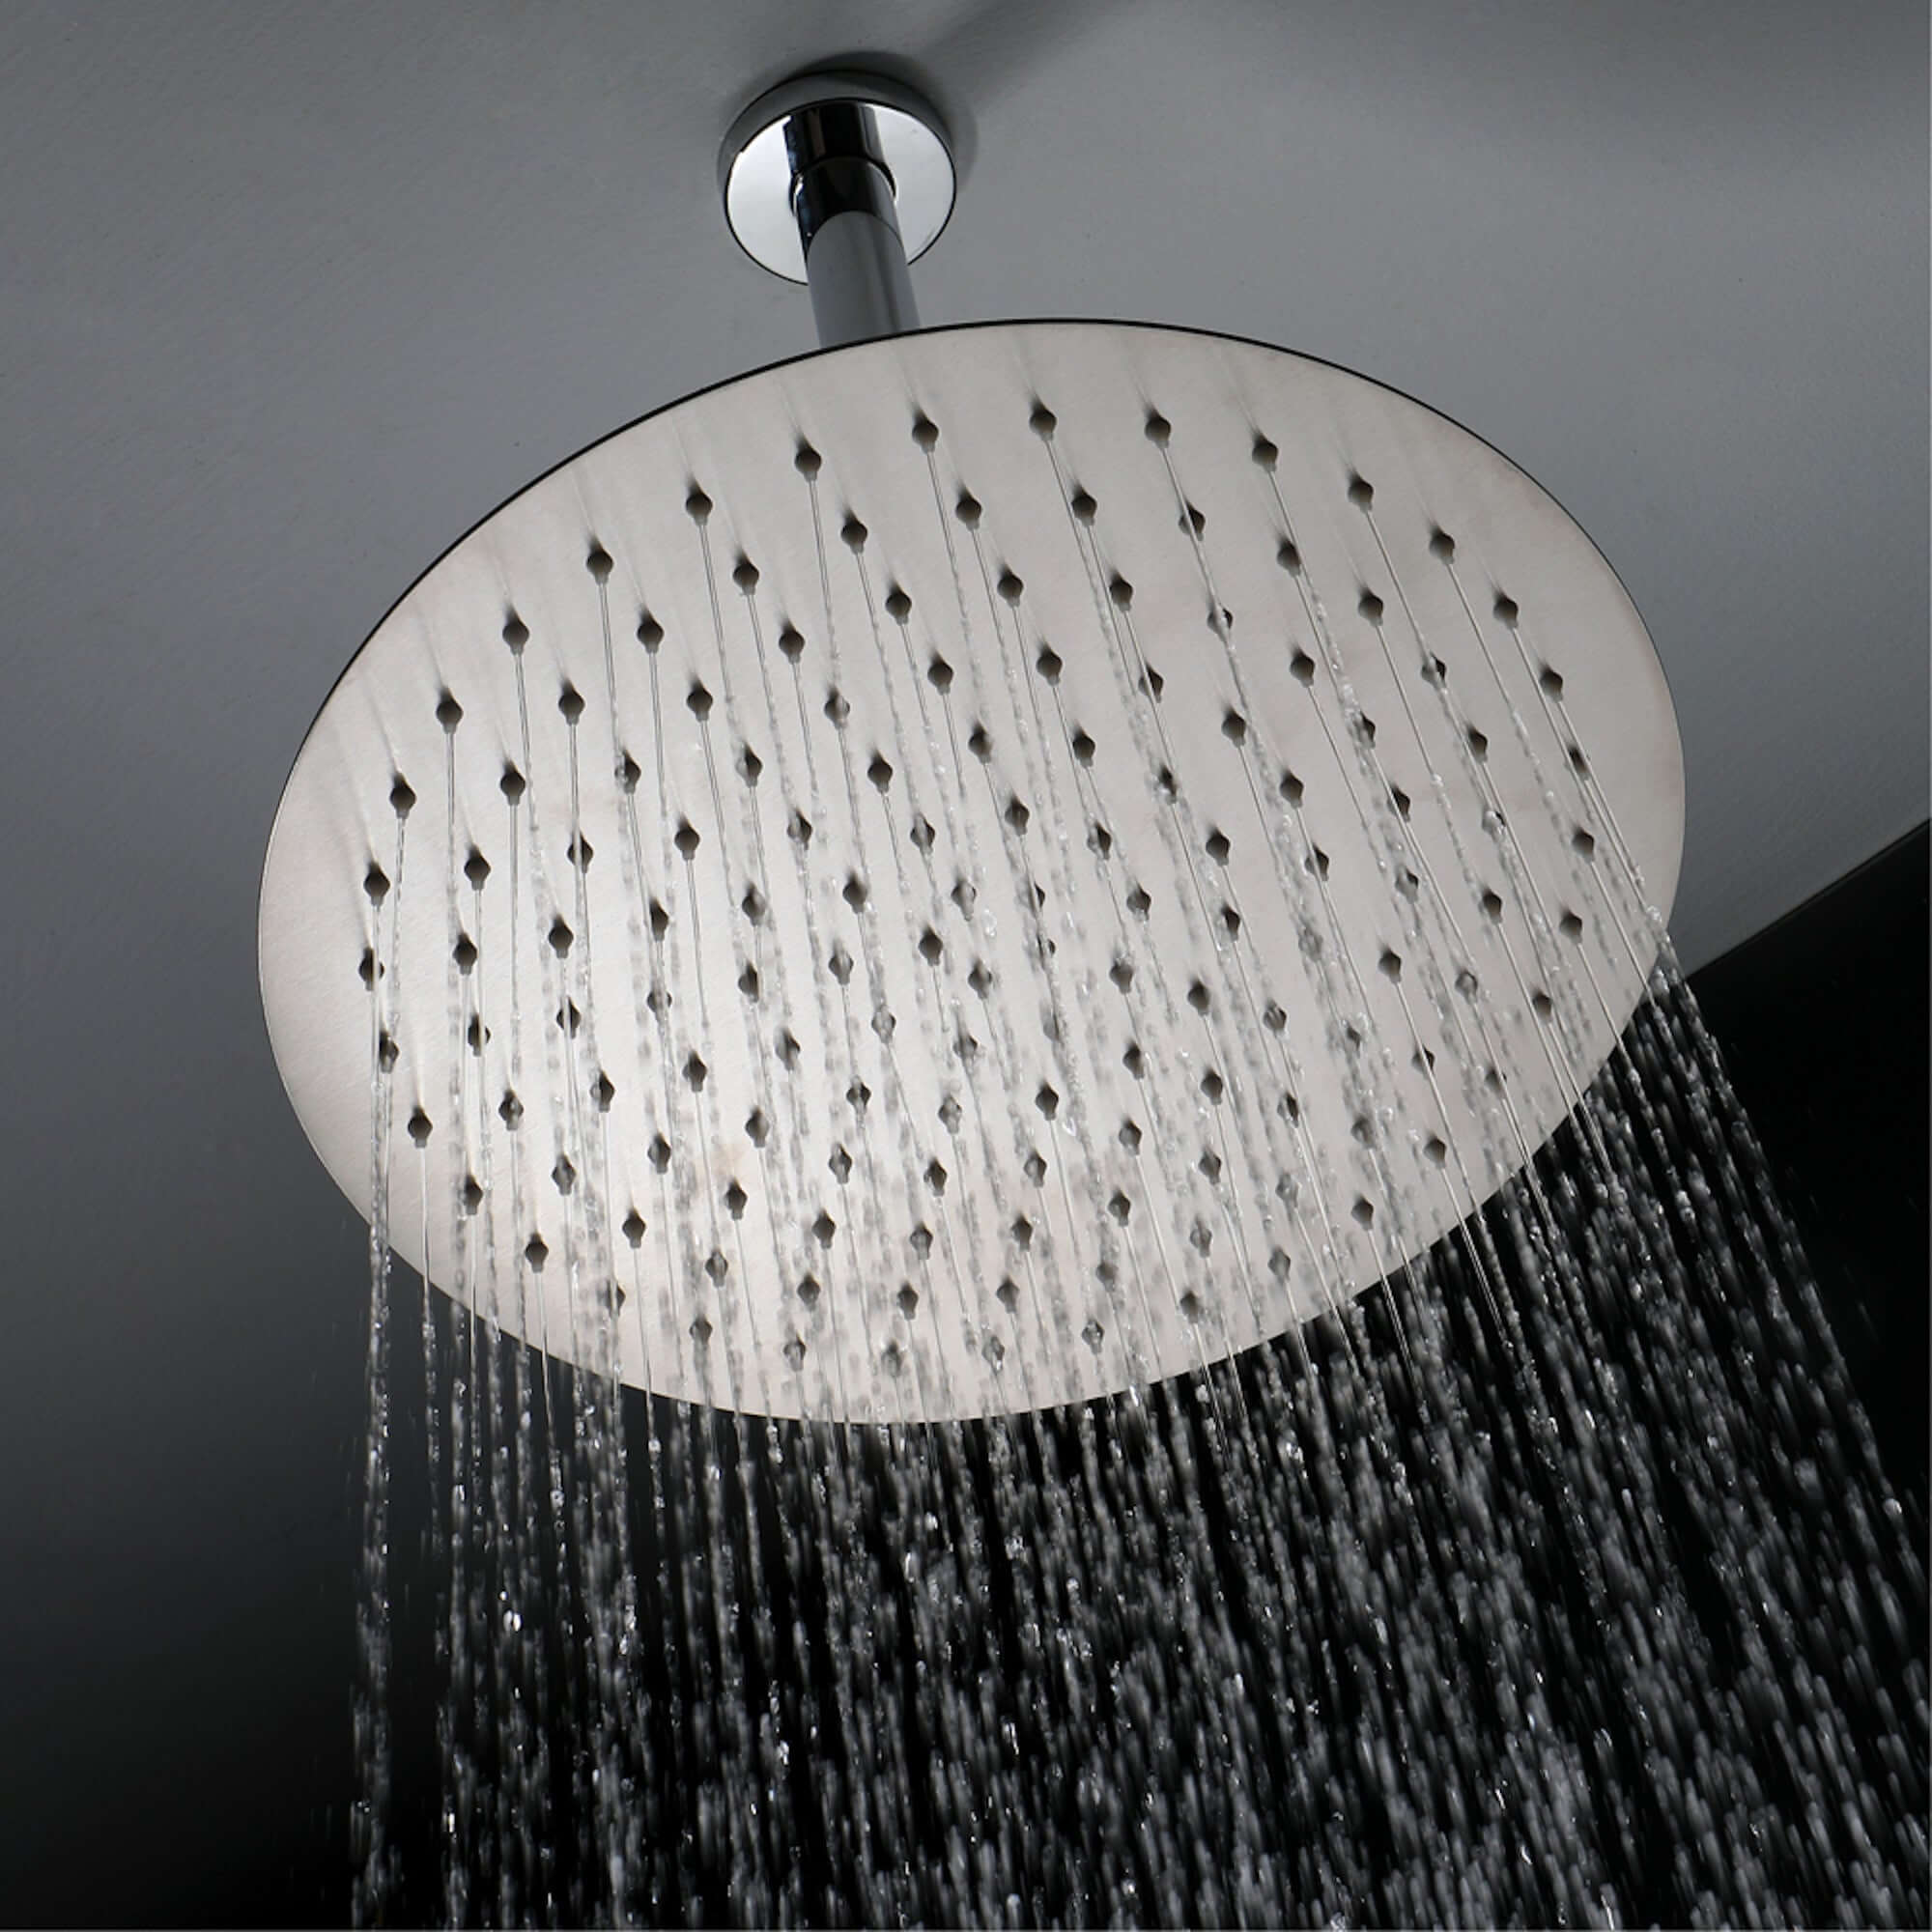 Contemporary Ceiling Fixed Round Ultra Slim Stainless Steel Shower Head 16" With 180mm Ceiling Shower Arm - Chrome